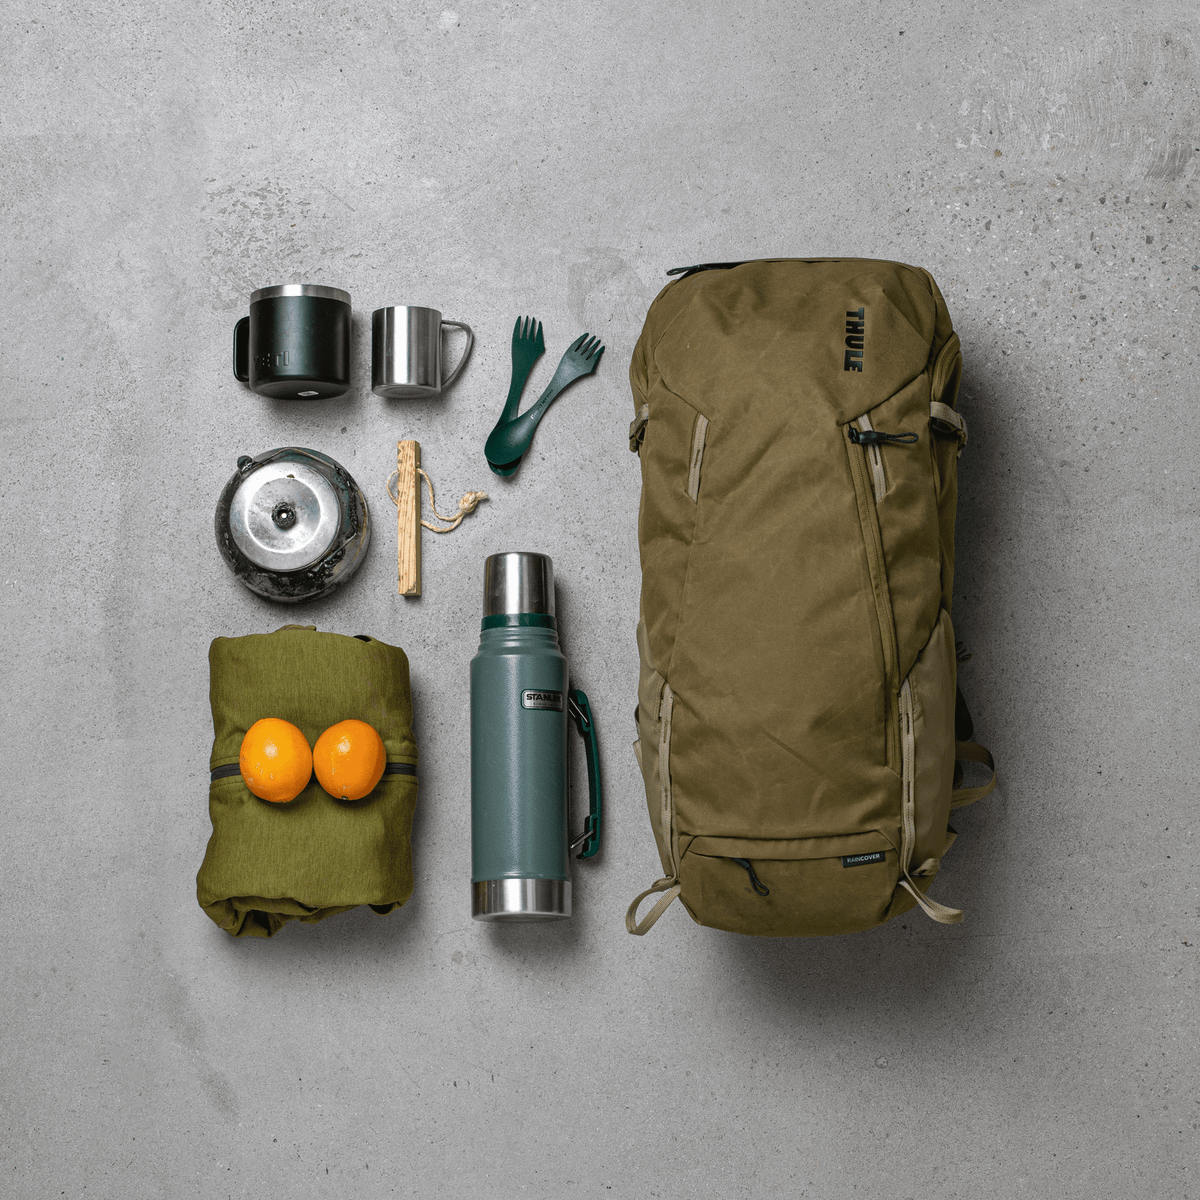 A Thule AllTrail X 35L hiking backpack lies on a concrete floor with hiking items placed around it.